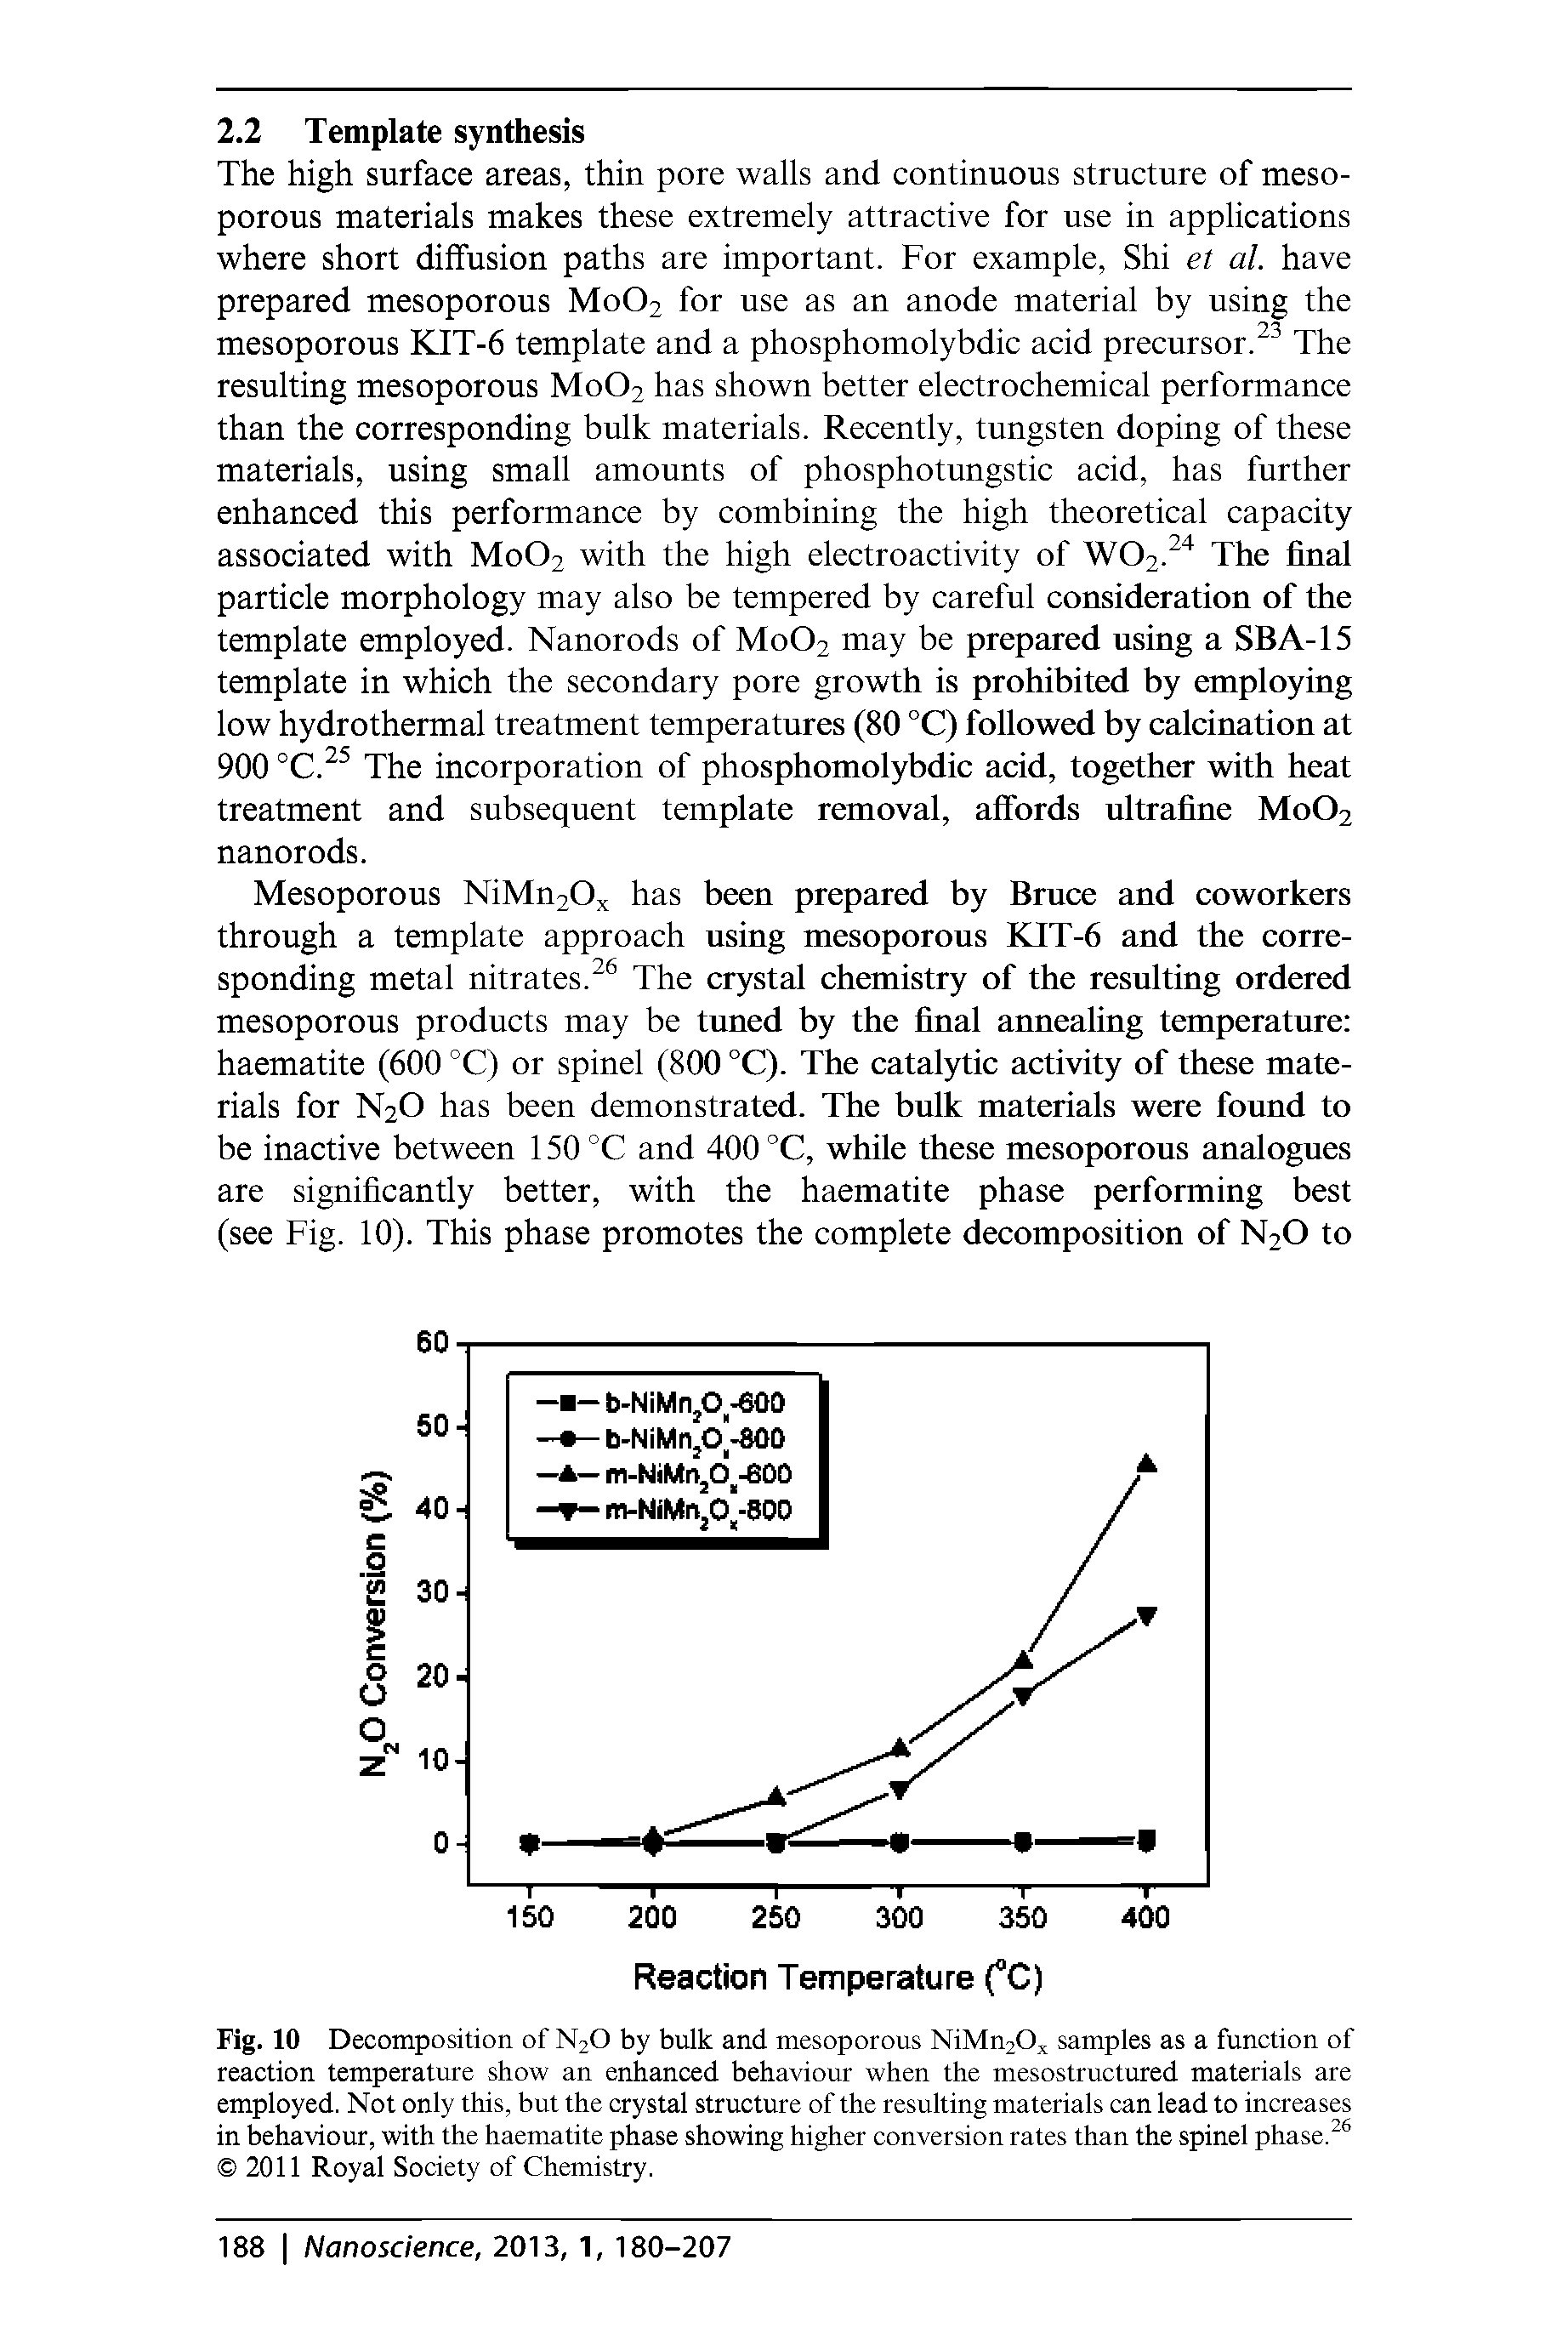 Fig. 10 Decomposition of N2O by bulk and mesoporous NiMn20x samples as a function of reaction temperature show an enhanced behaviour when the mesostructured materials are employed. Not only this, but the crystal structure of the resulting materials can lead to increases in behaviour, with the haematite phase showing higher conversion rates than the spinel phase. 2011 Royal Society of Chemistry.